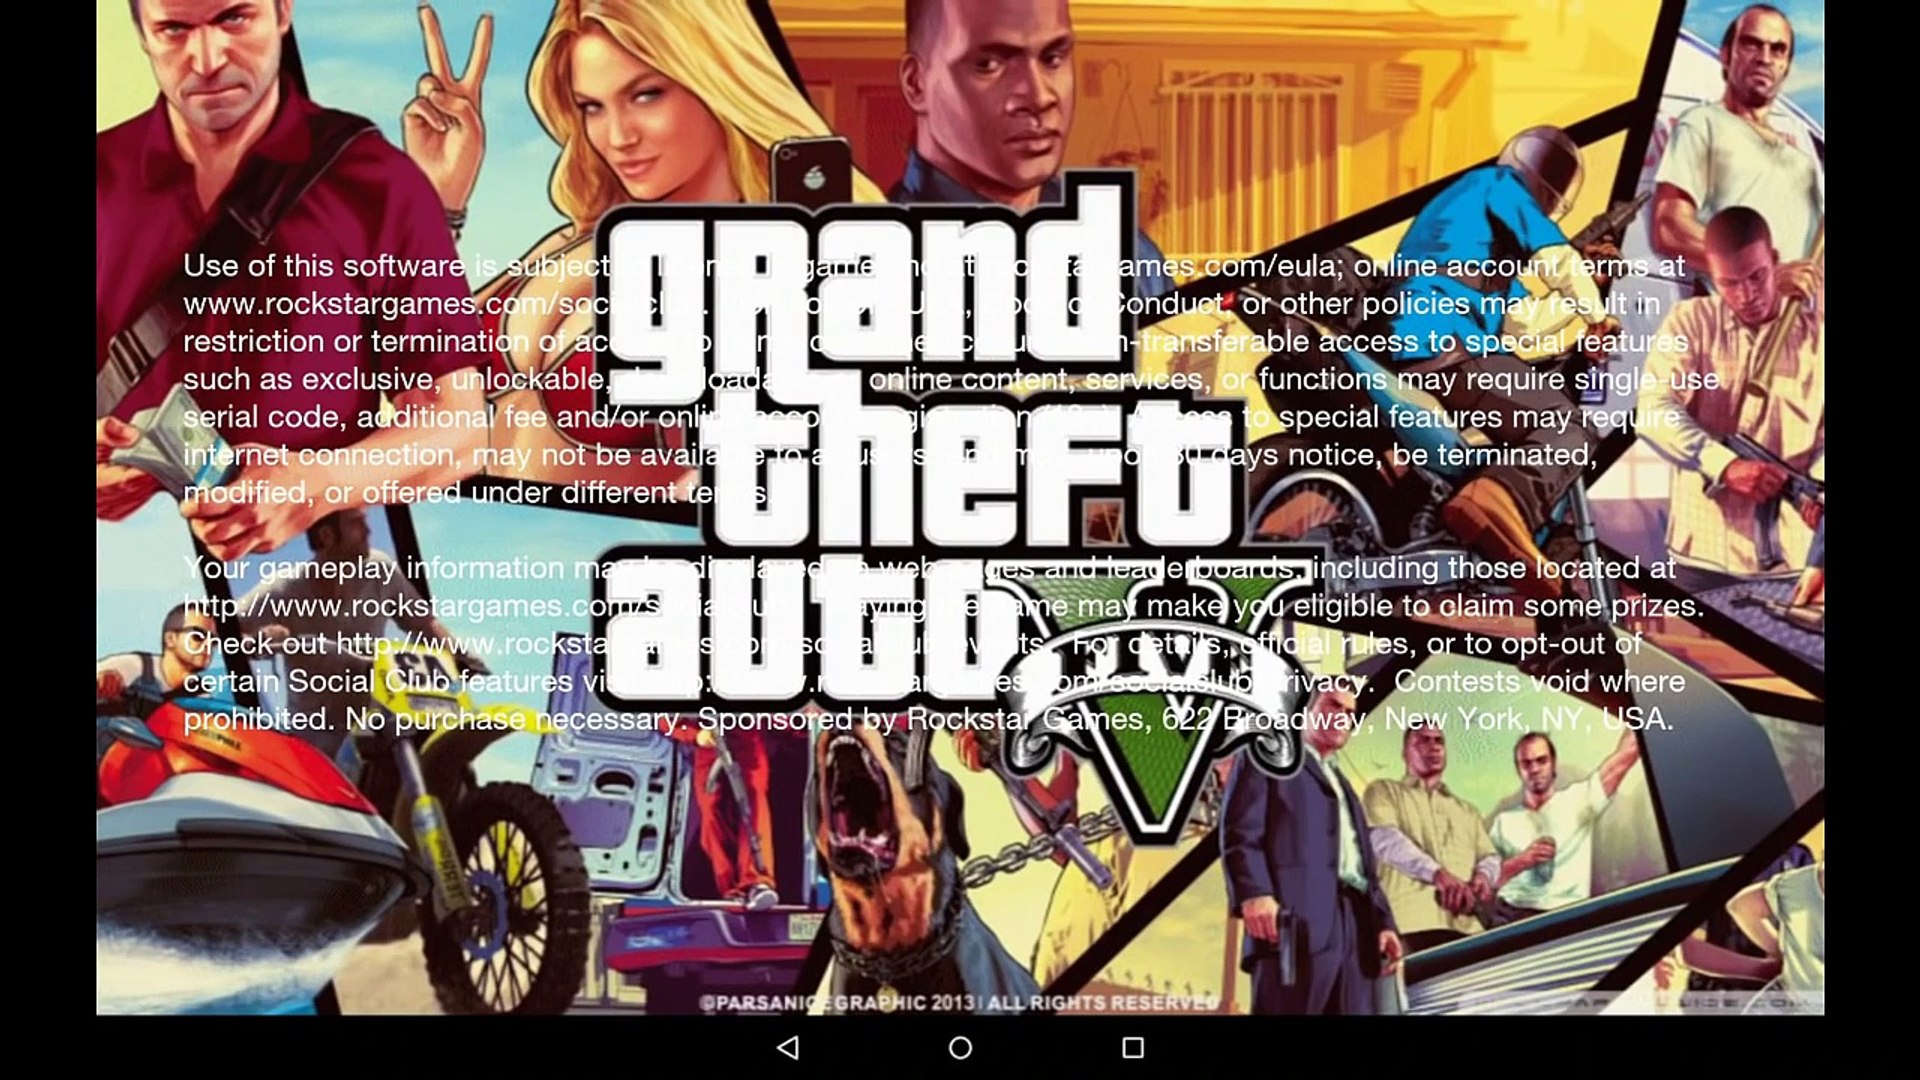 HOW TO DOWNLOAD GTA 5 MOBILE ANDROID, INSTALL APK+OBB 2021